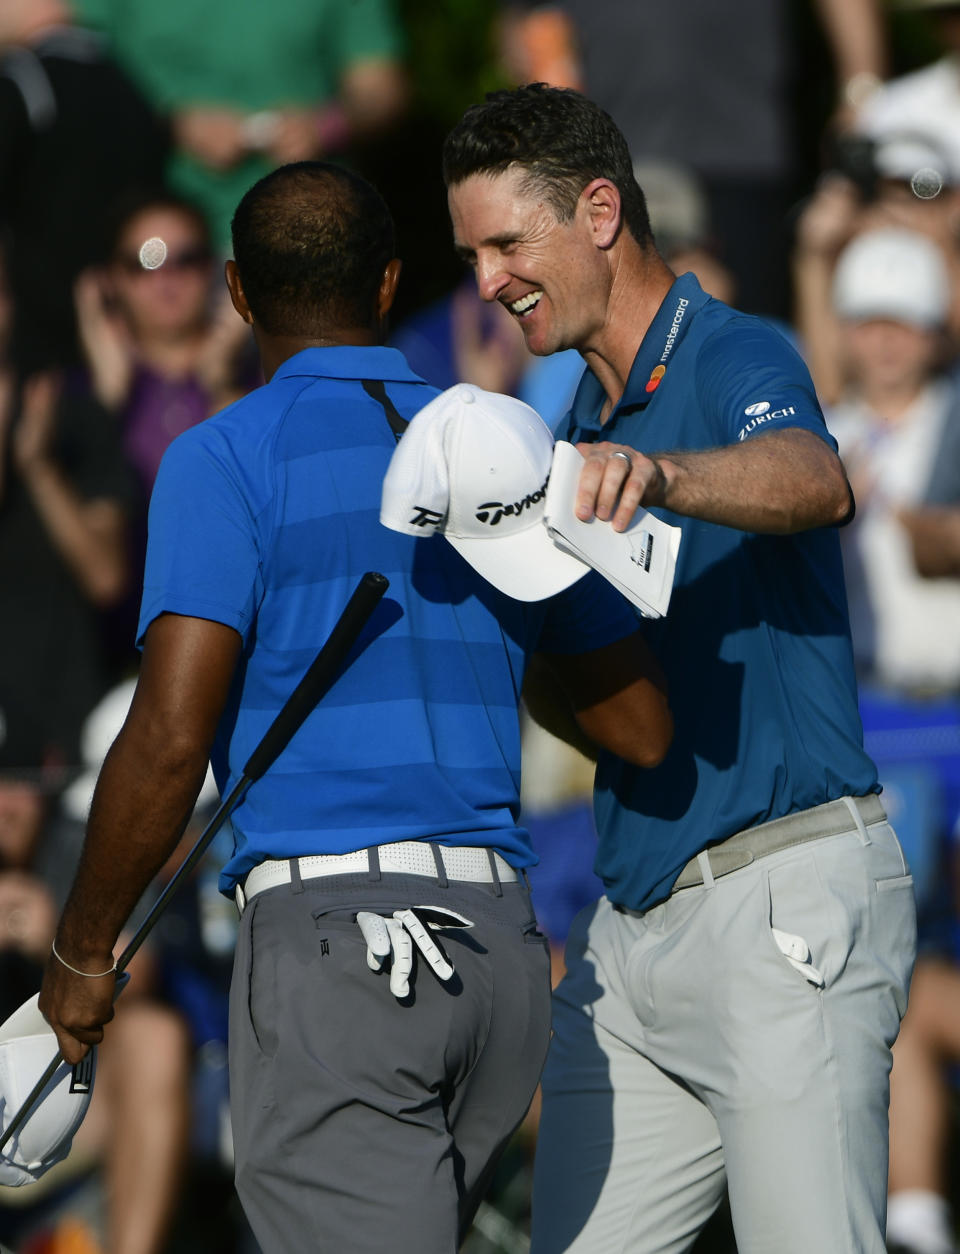 Justin Rose congratulates Tiger Woods, on his third round finish in the Tour Championship golf tournament Saturday, Sept. 22, 2018, in Atlanta. Woods maintained the lead with a 12 under par. (AP Photo/John Amis)